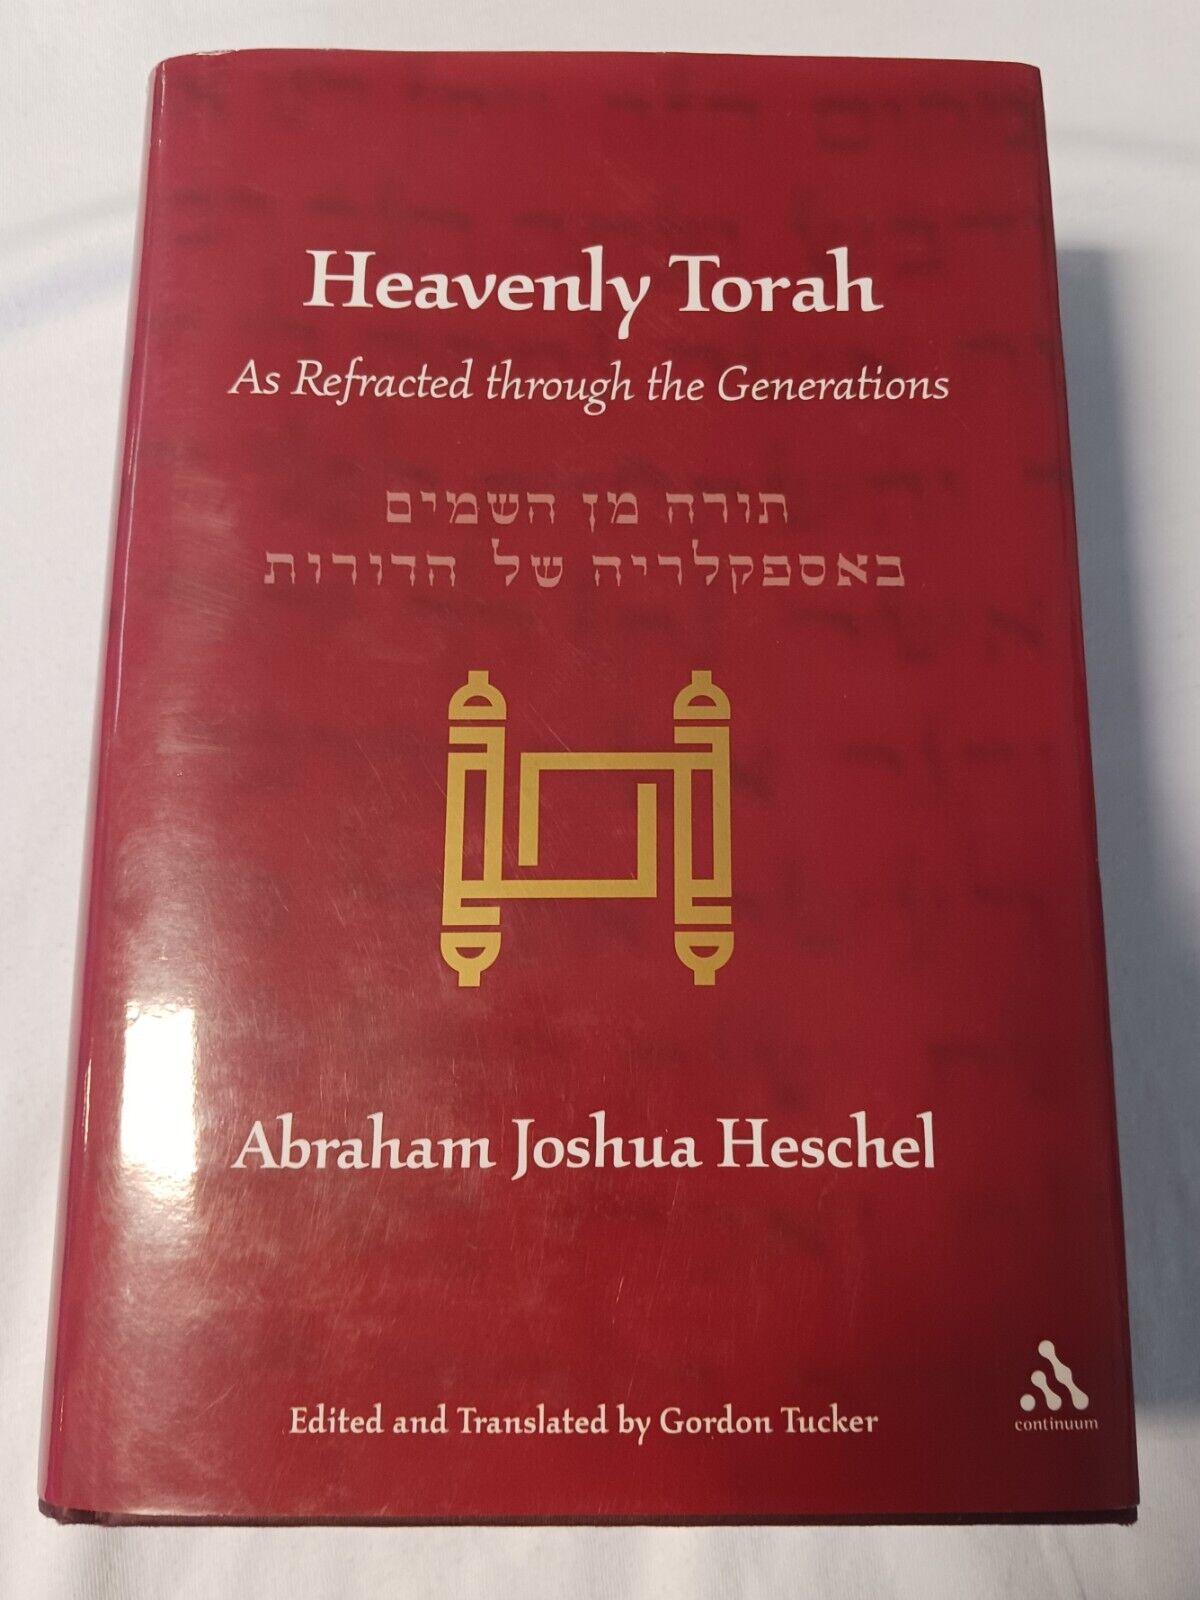 HEAVENLY TORAH: As Refracted Through the Generations Hardcover Book